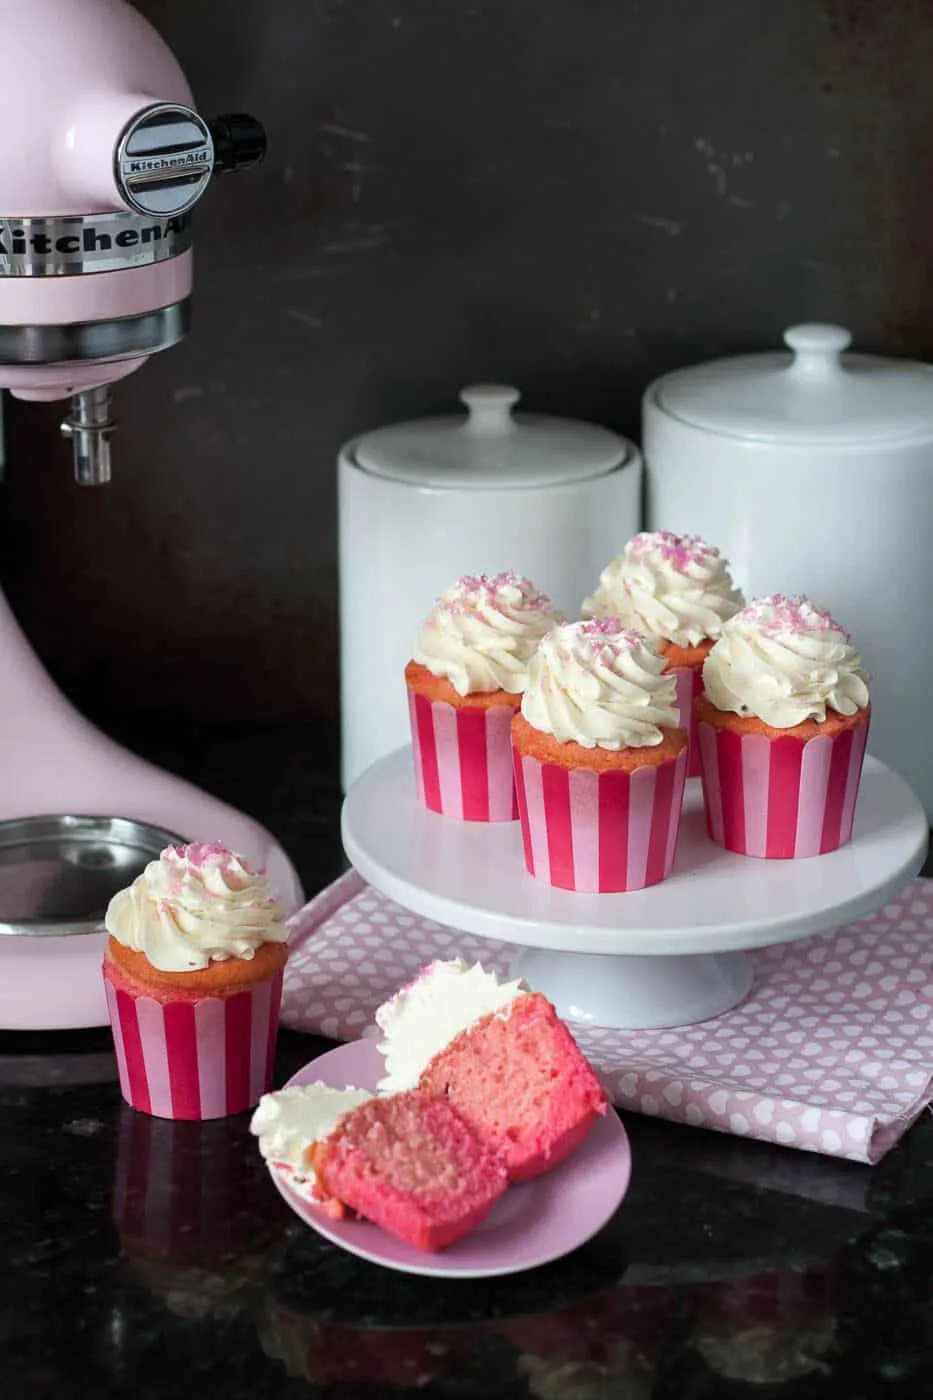 Pink Ombre Cupcake recipe for #10000Cupcakes campaign by @KitchenAidUSA and @hhgregg. Find the vanilla cupcake recipe and full tutorial on GoodieGodmother.com #ad